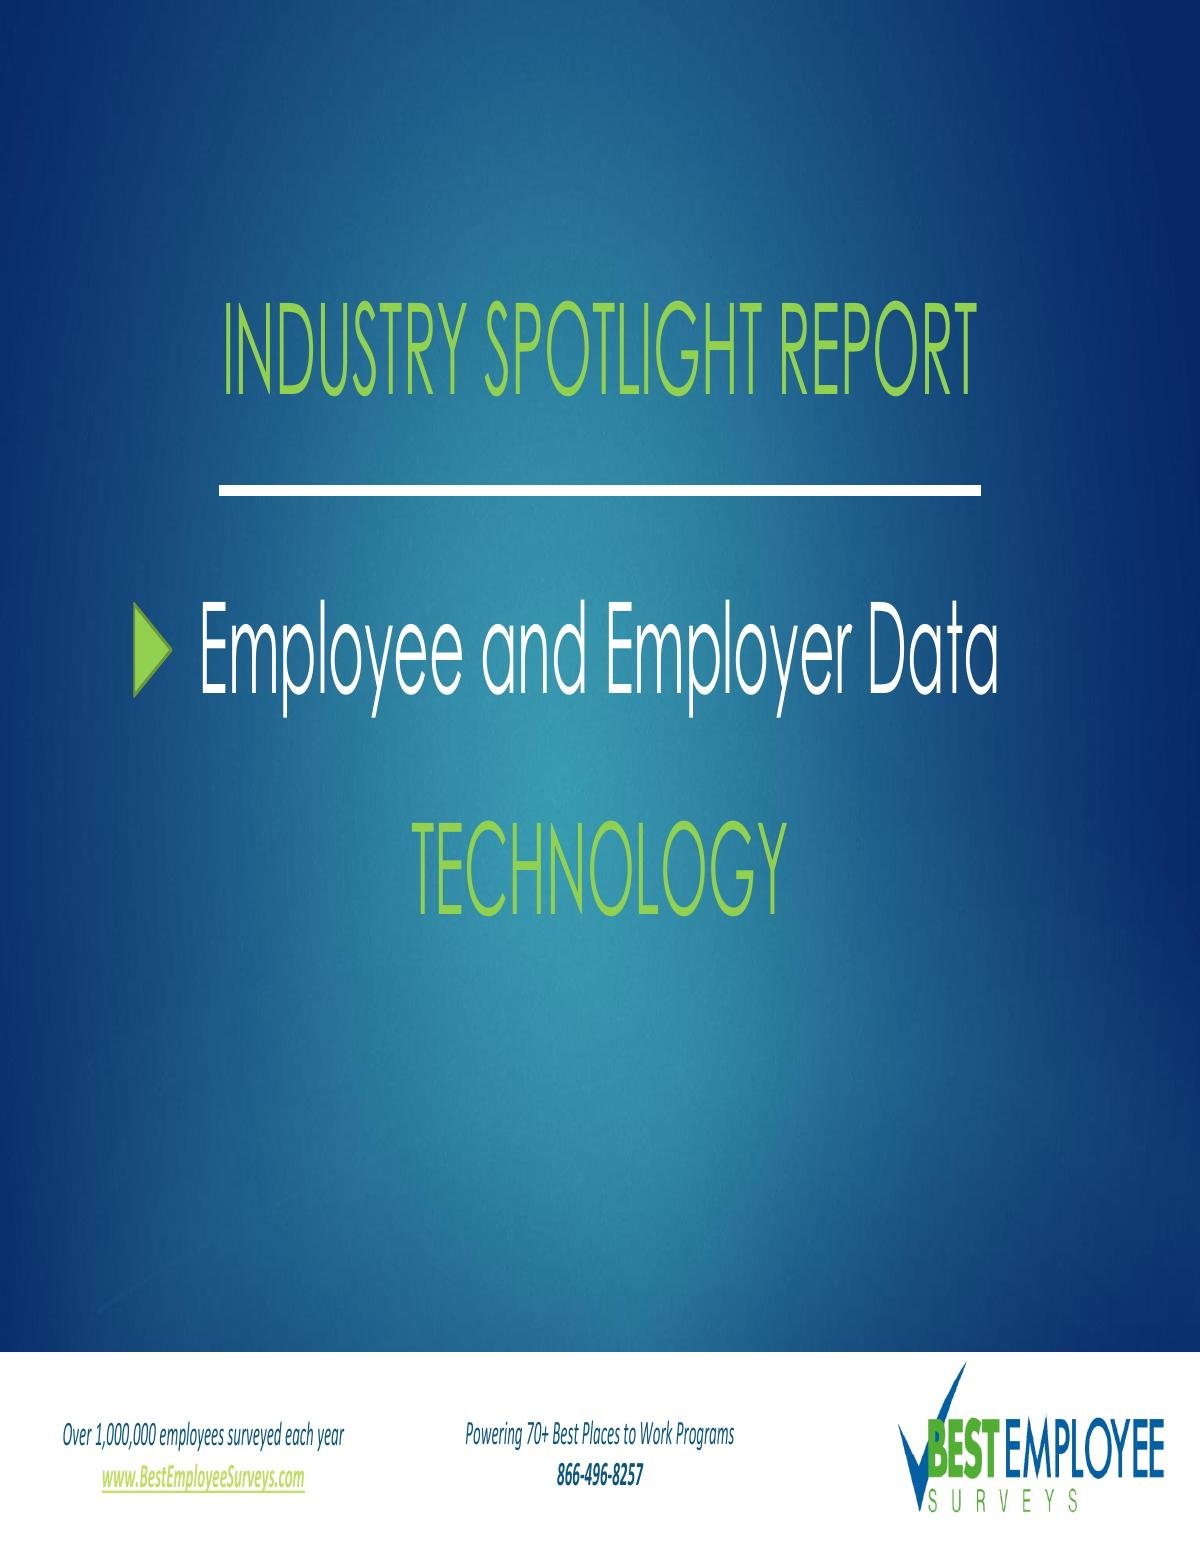 2019 Employee Engagement and Satisfaction Report - Technology